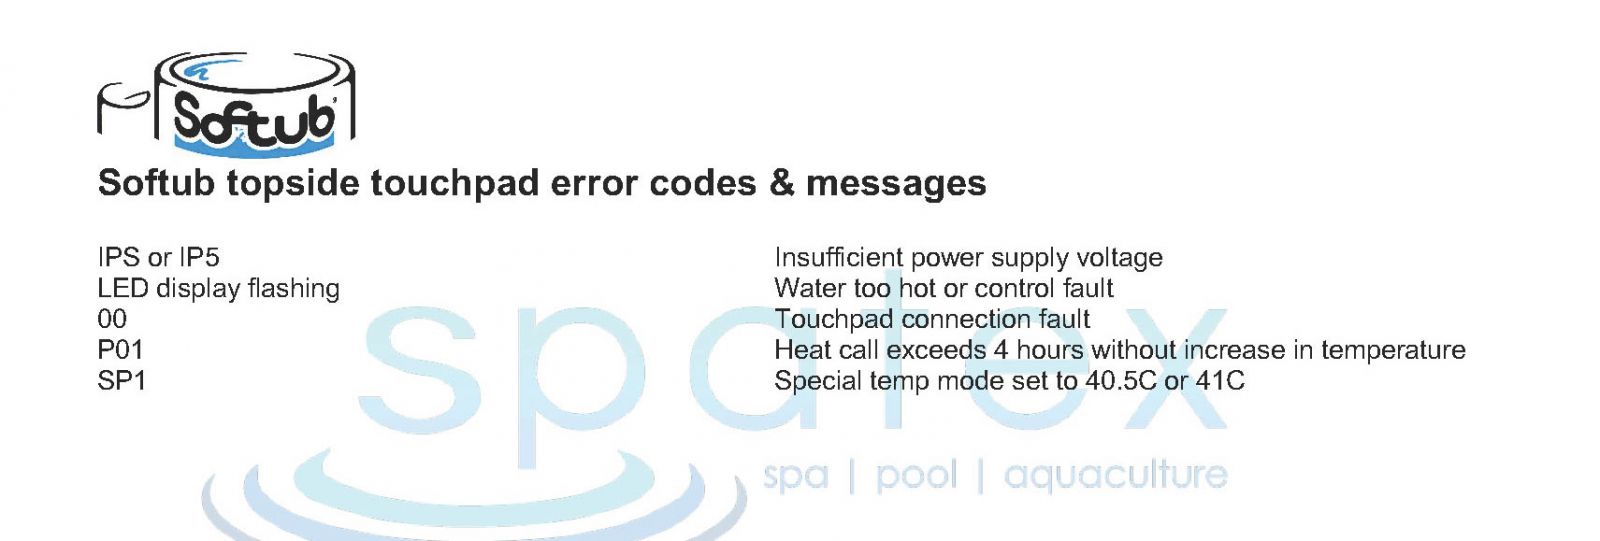 Softub topside touchpad fault codes